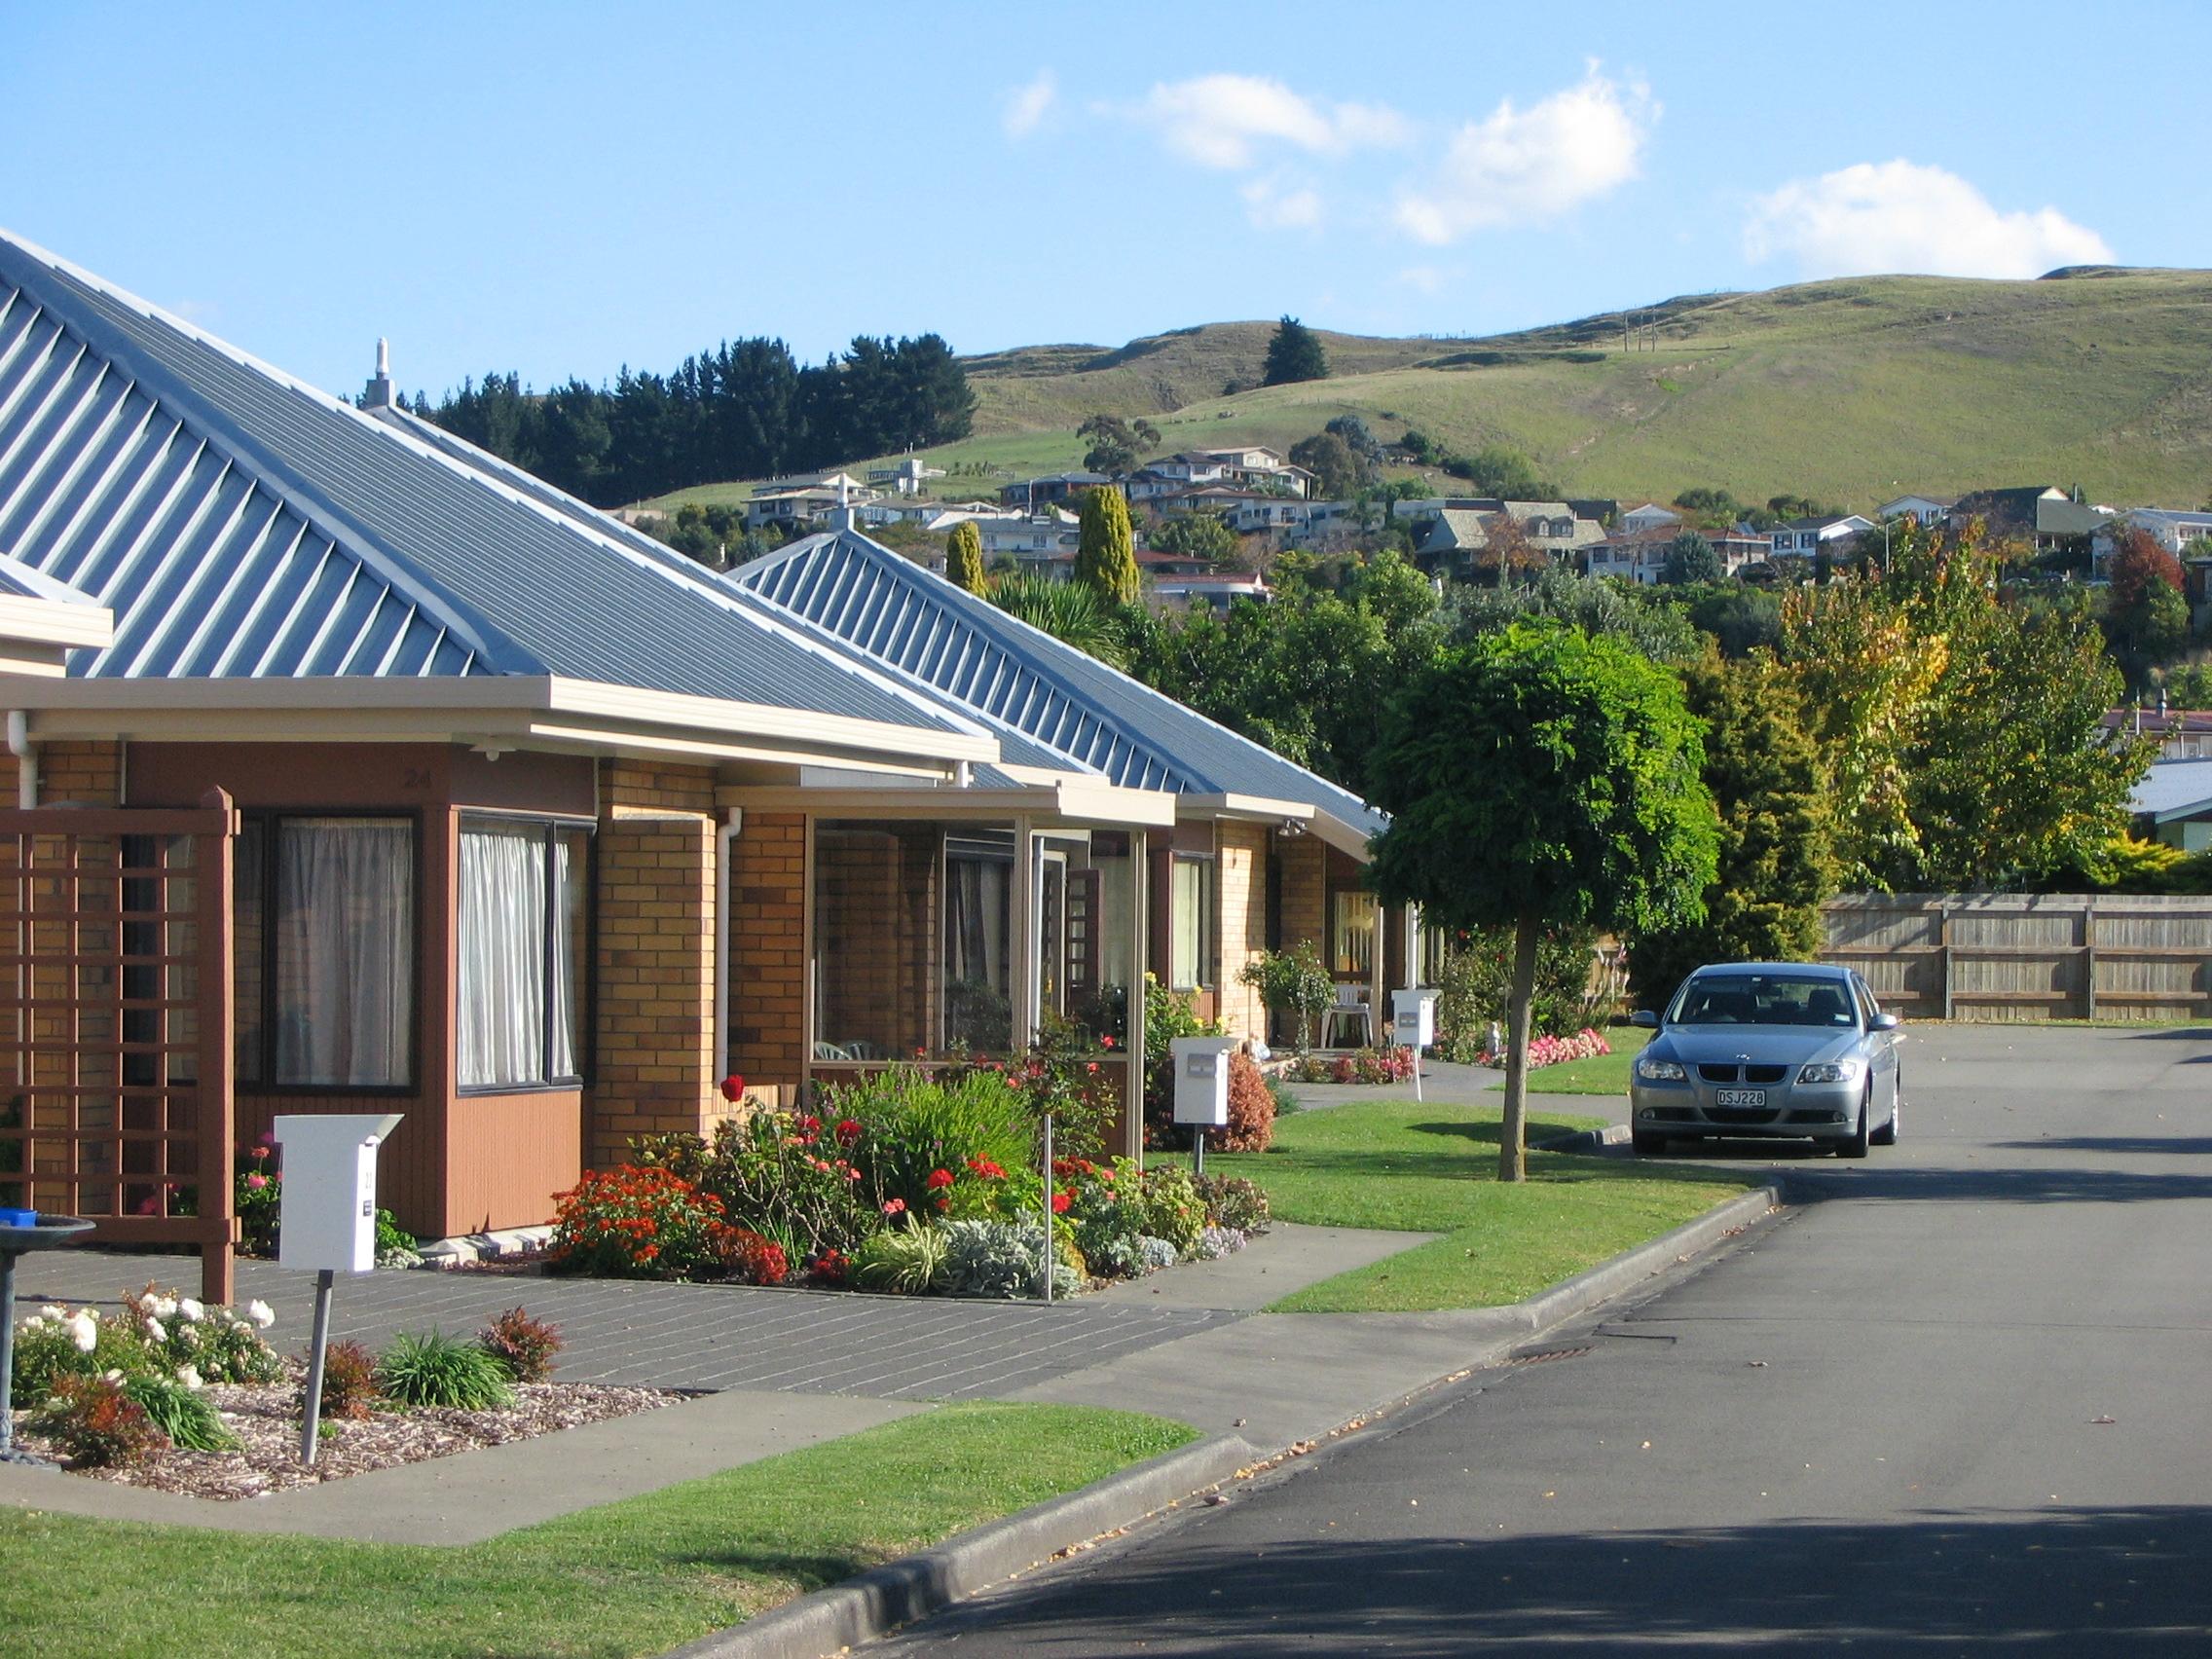 Retirement villas with hills in background